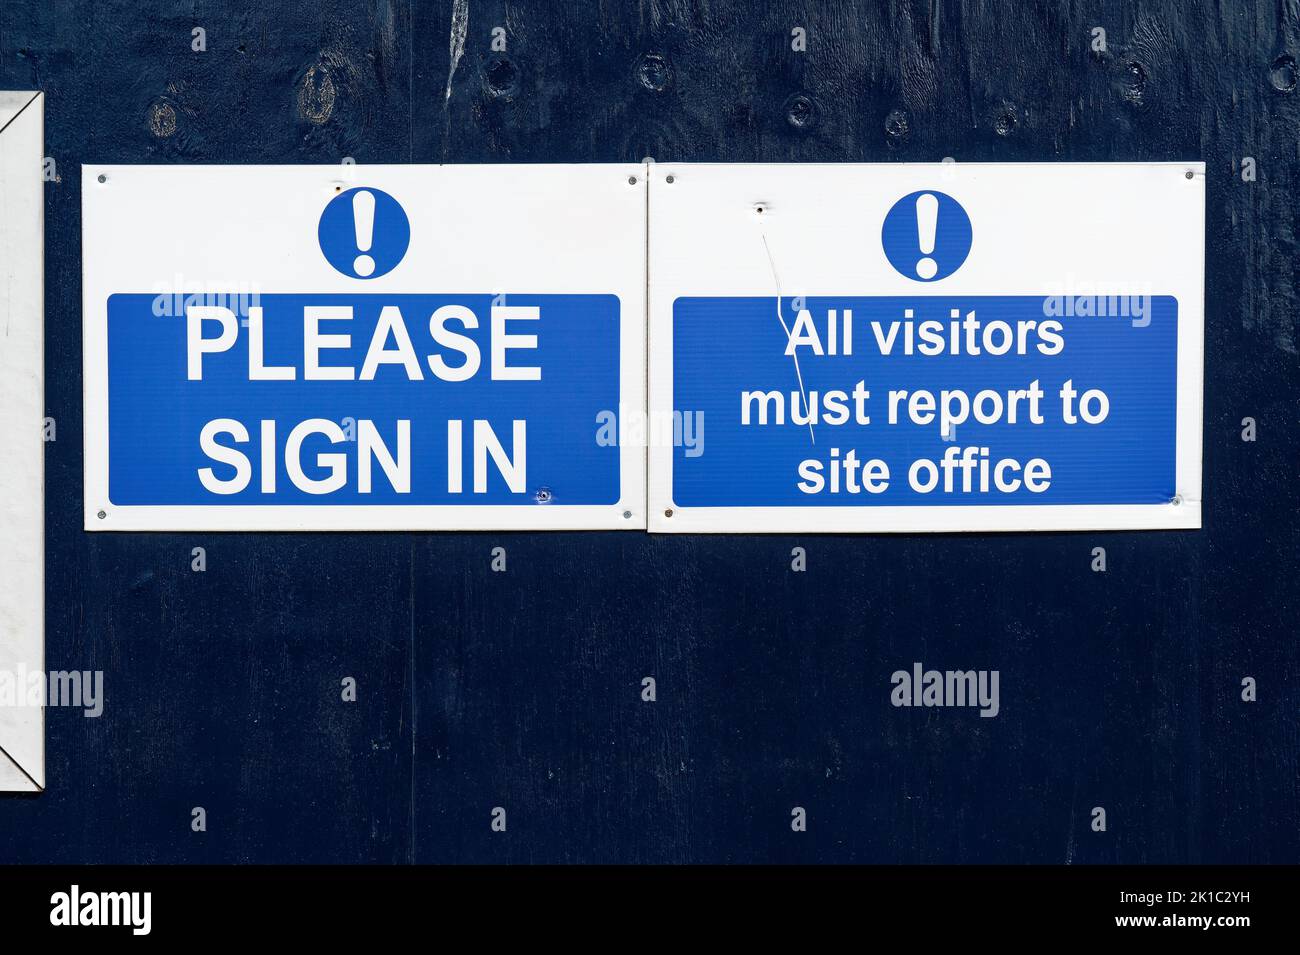 Please sign in for all visitors and report to office sign at construction site Stock Photo